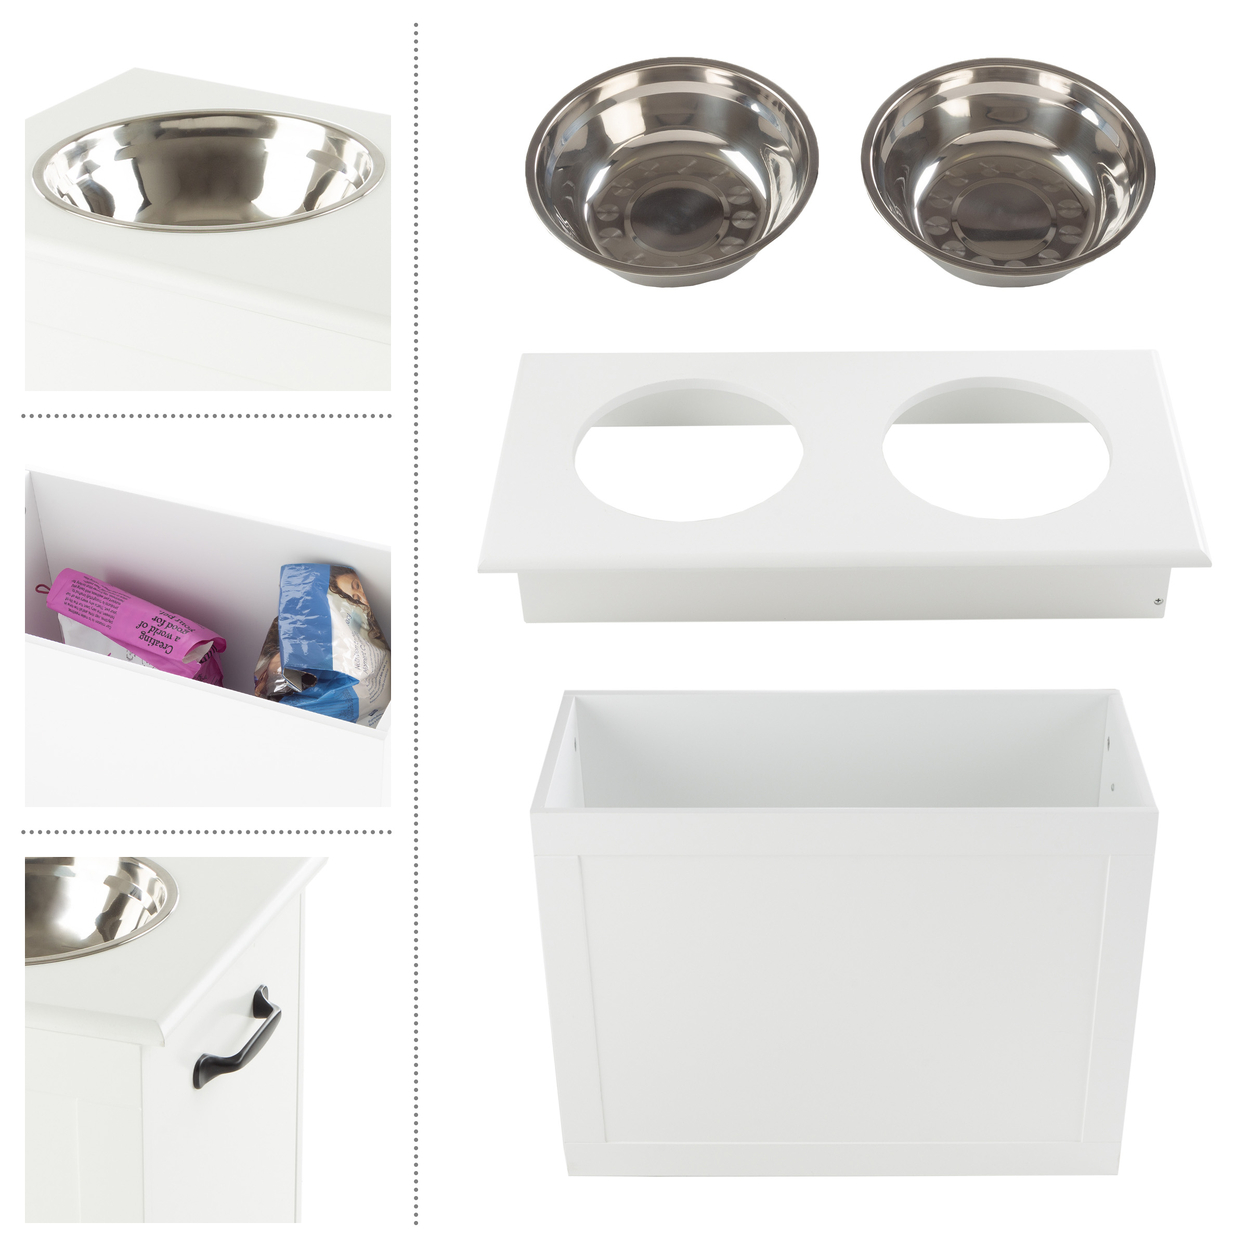 Elevated Dog Bowls Storage 16in Tall Feeding Tray Pet Supplies 50oz, White